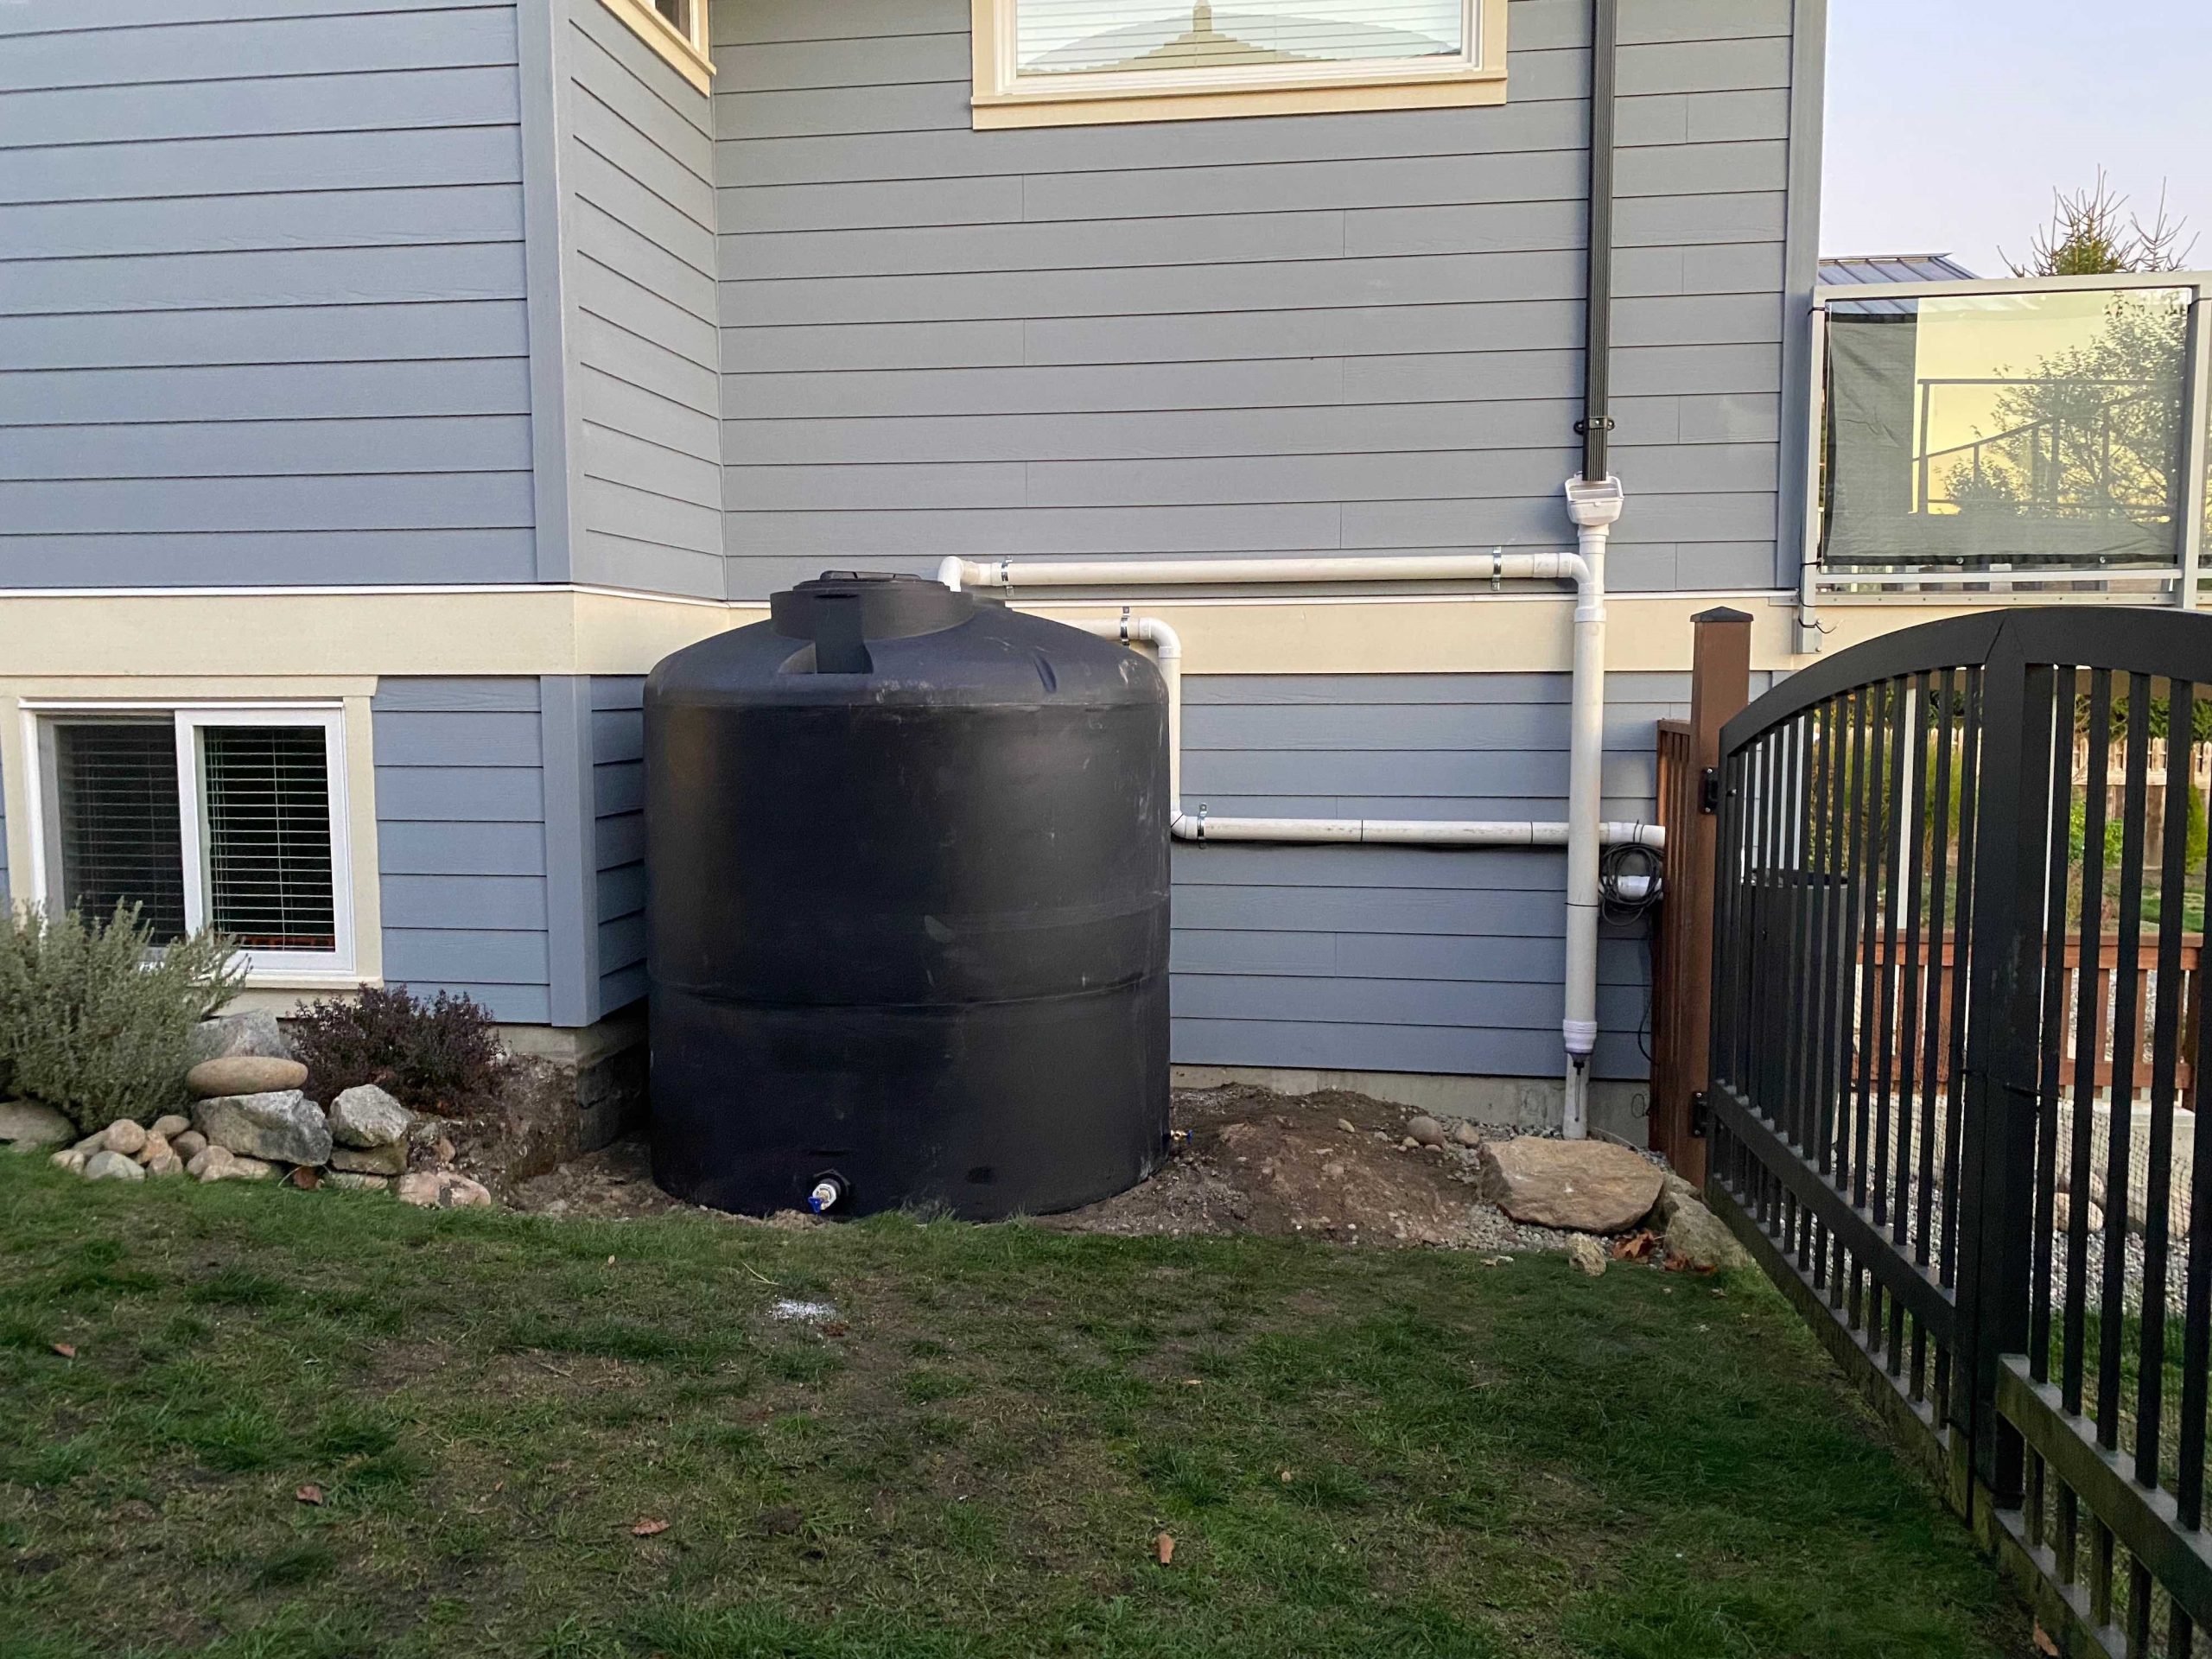 Picture shows a rainwater harvesting system beside a home